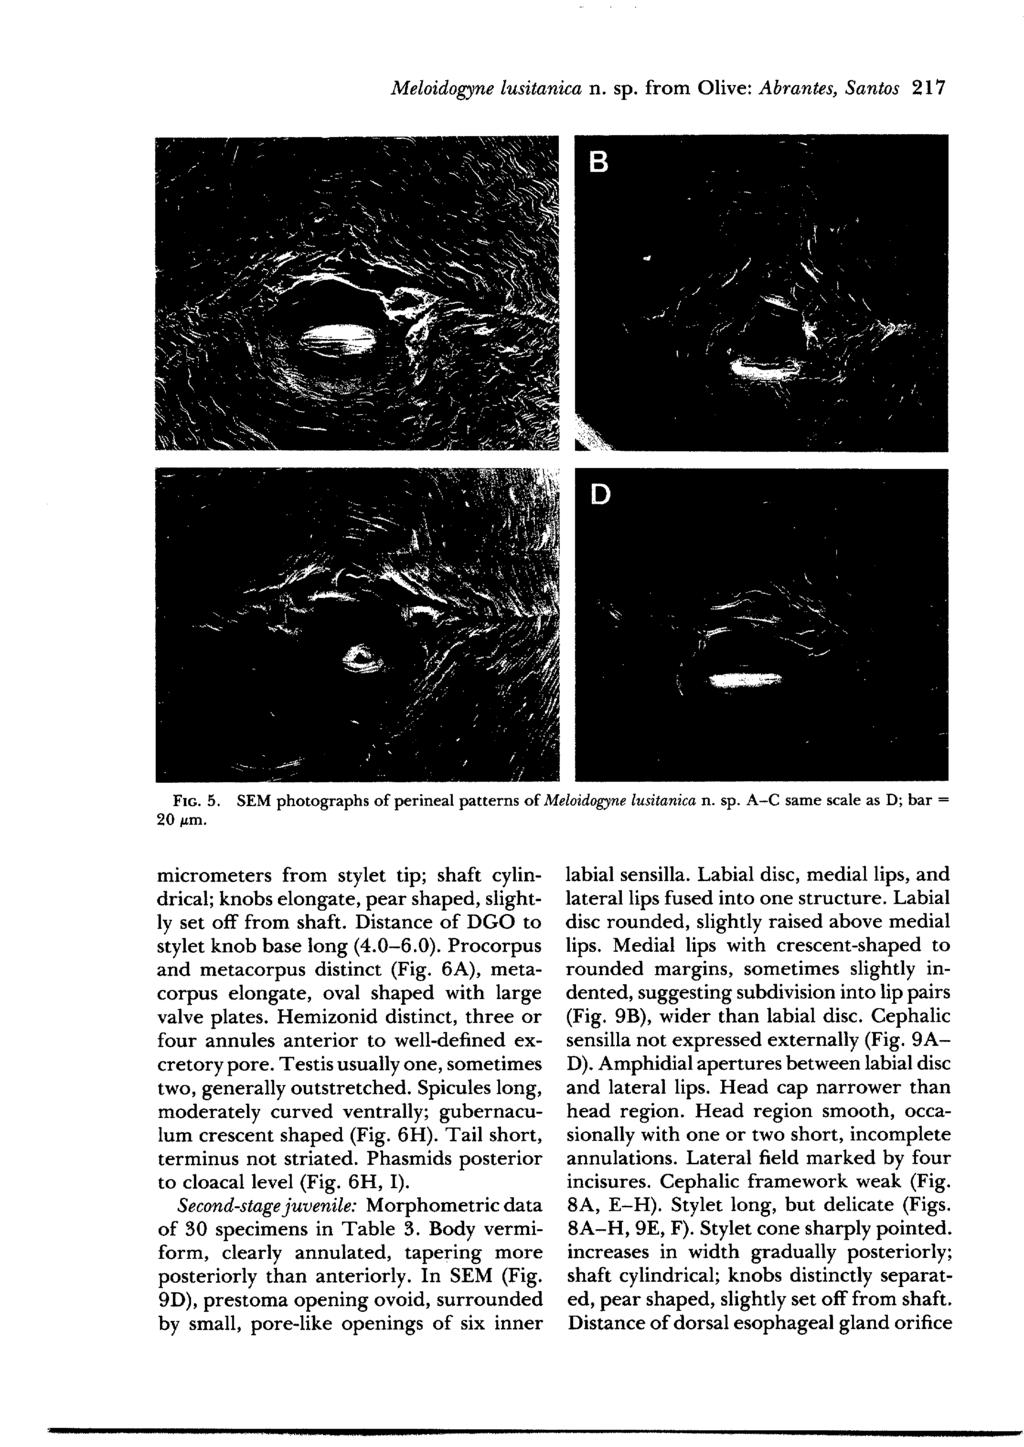 Meloidogyne lusitanica n. sp. from Olive: Abrantes, Santos 217 FIG. 5. SEM photographs of perineal patterns of Meloidogyne lusitanica n. sp. A-C same scale as D; bar = 20 #m.